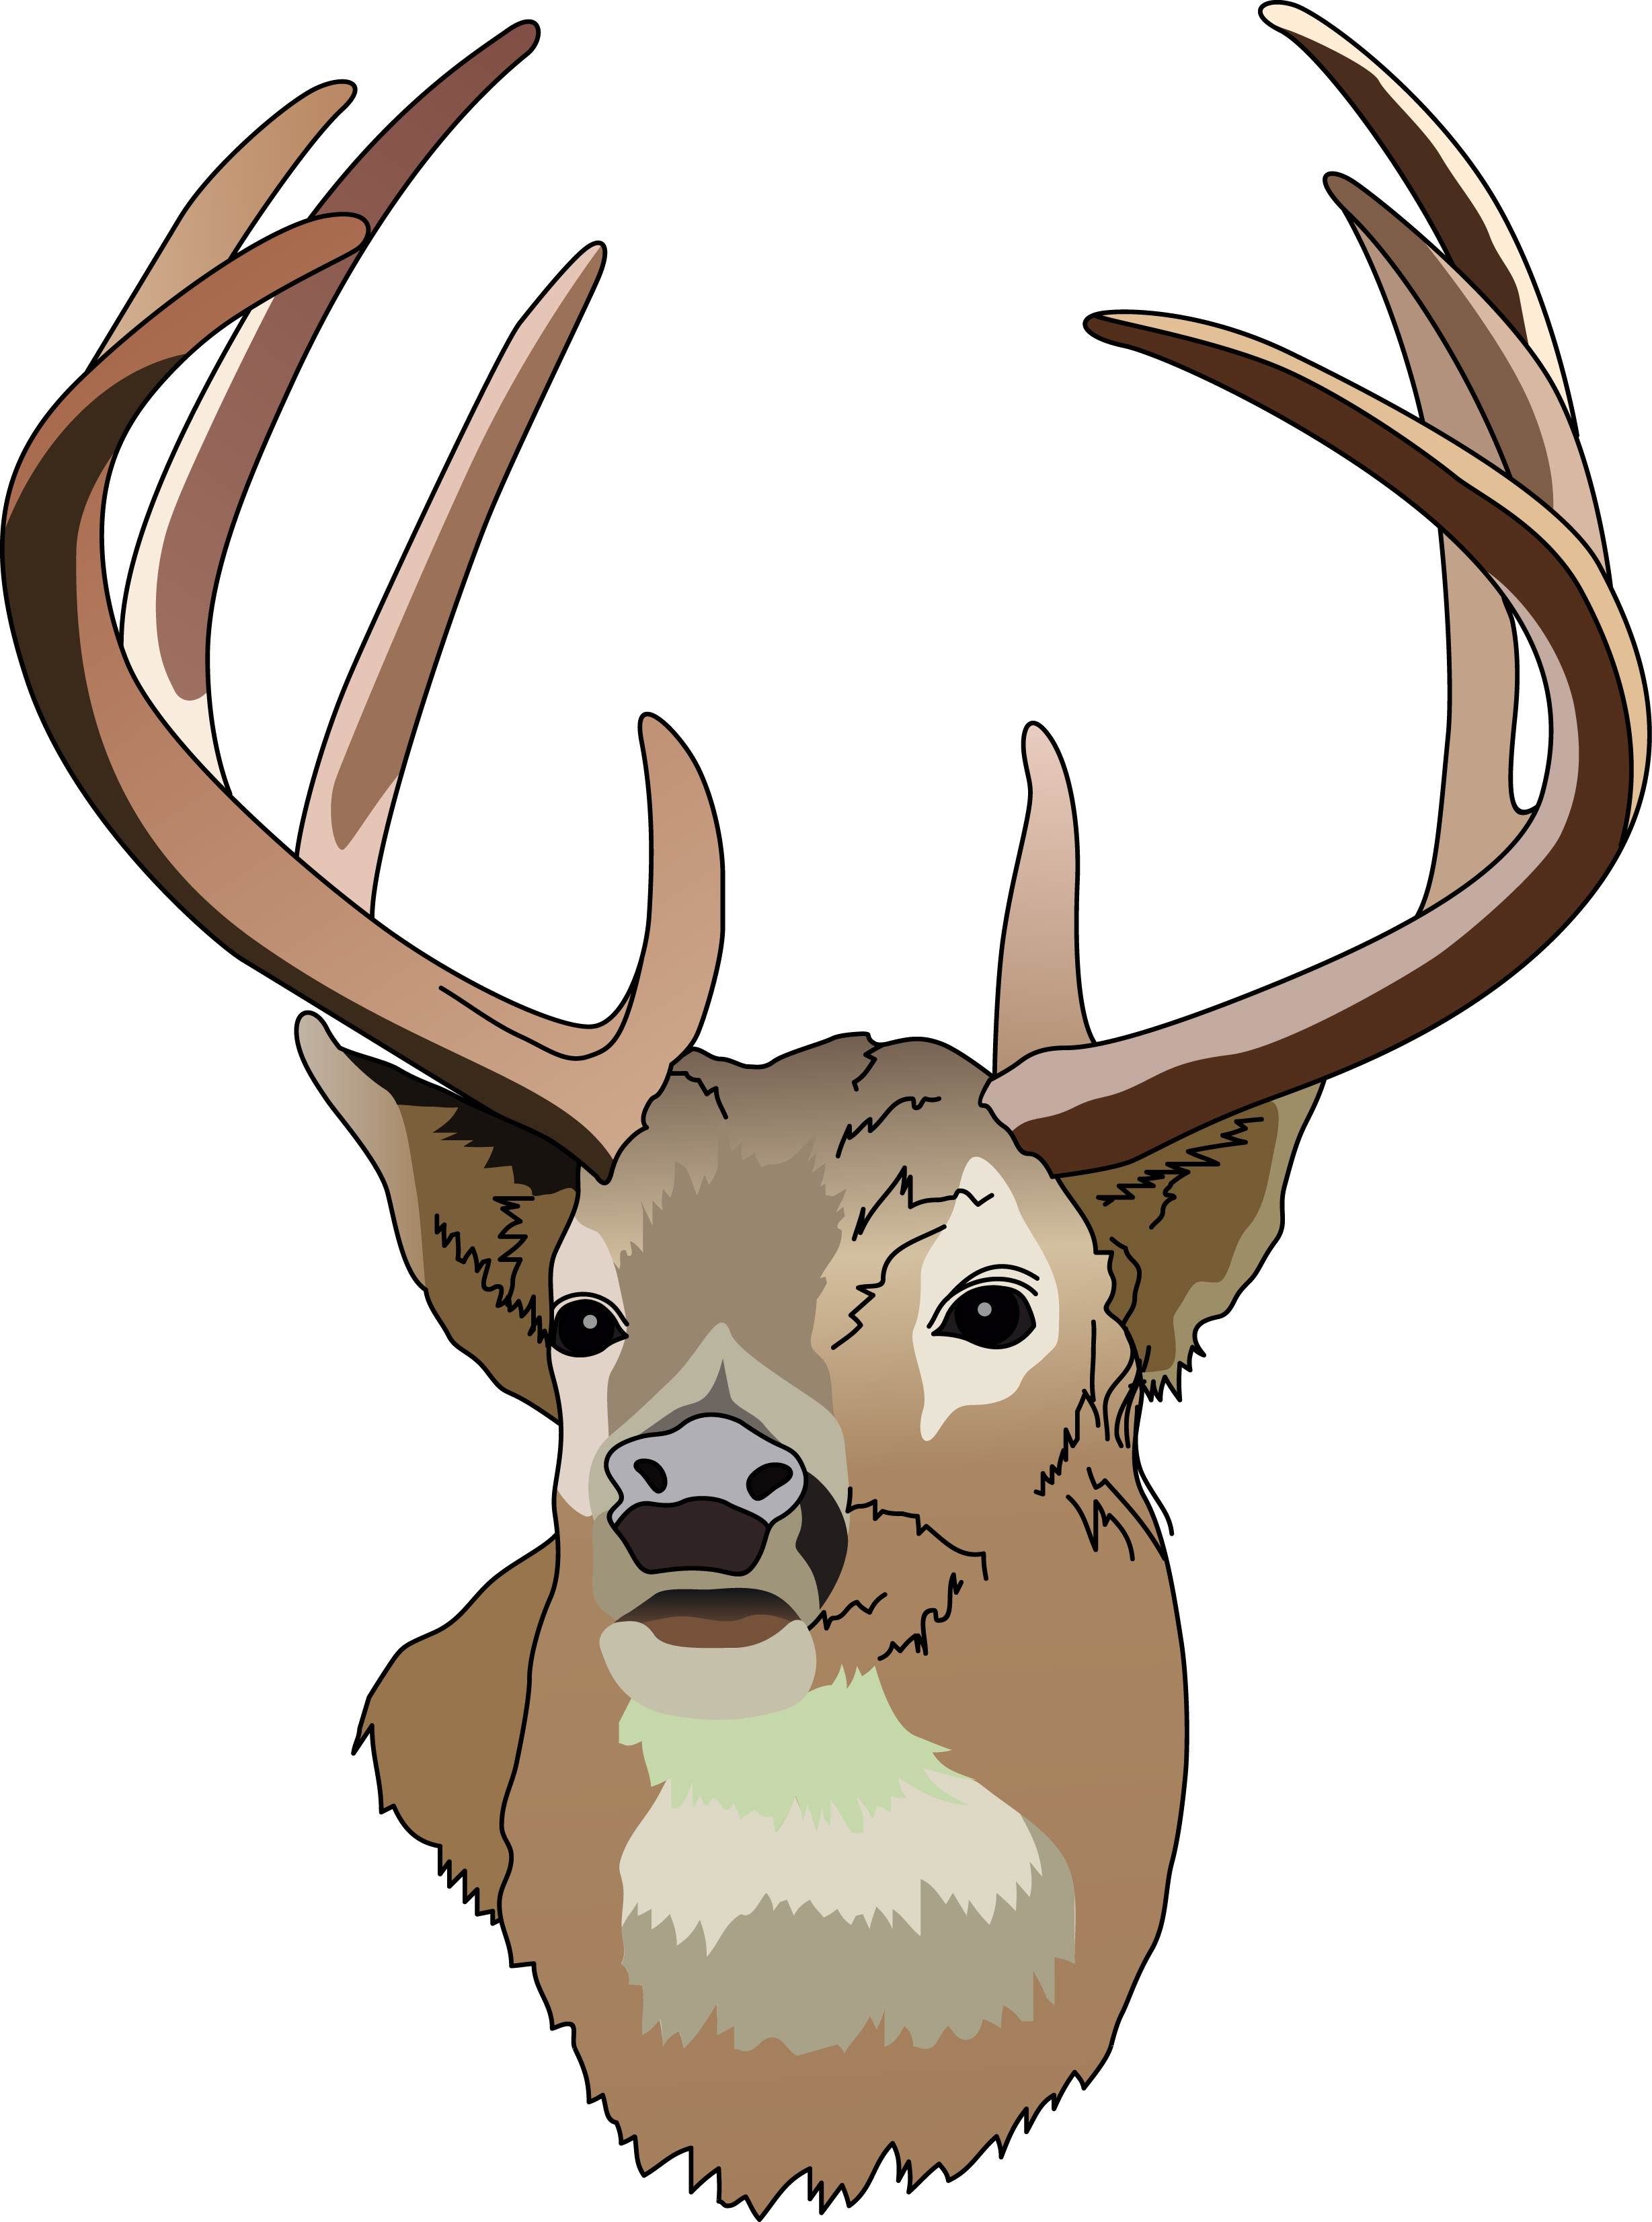 Whitetail deer clip art | Clipart library - Free Clipart Images